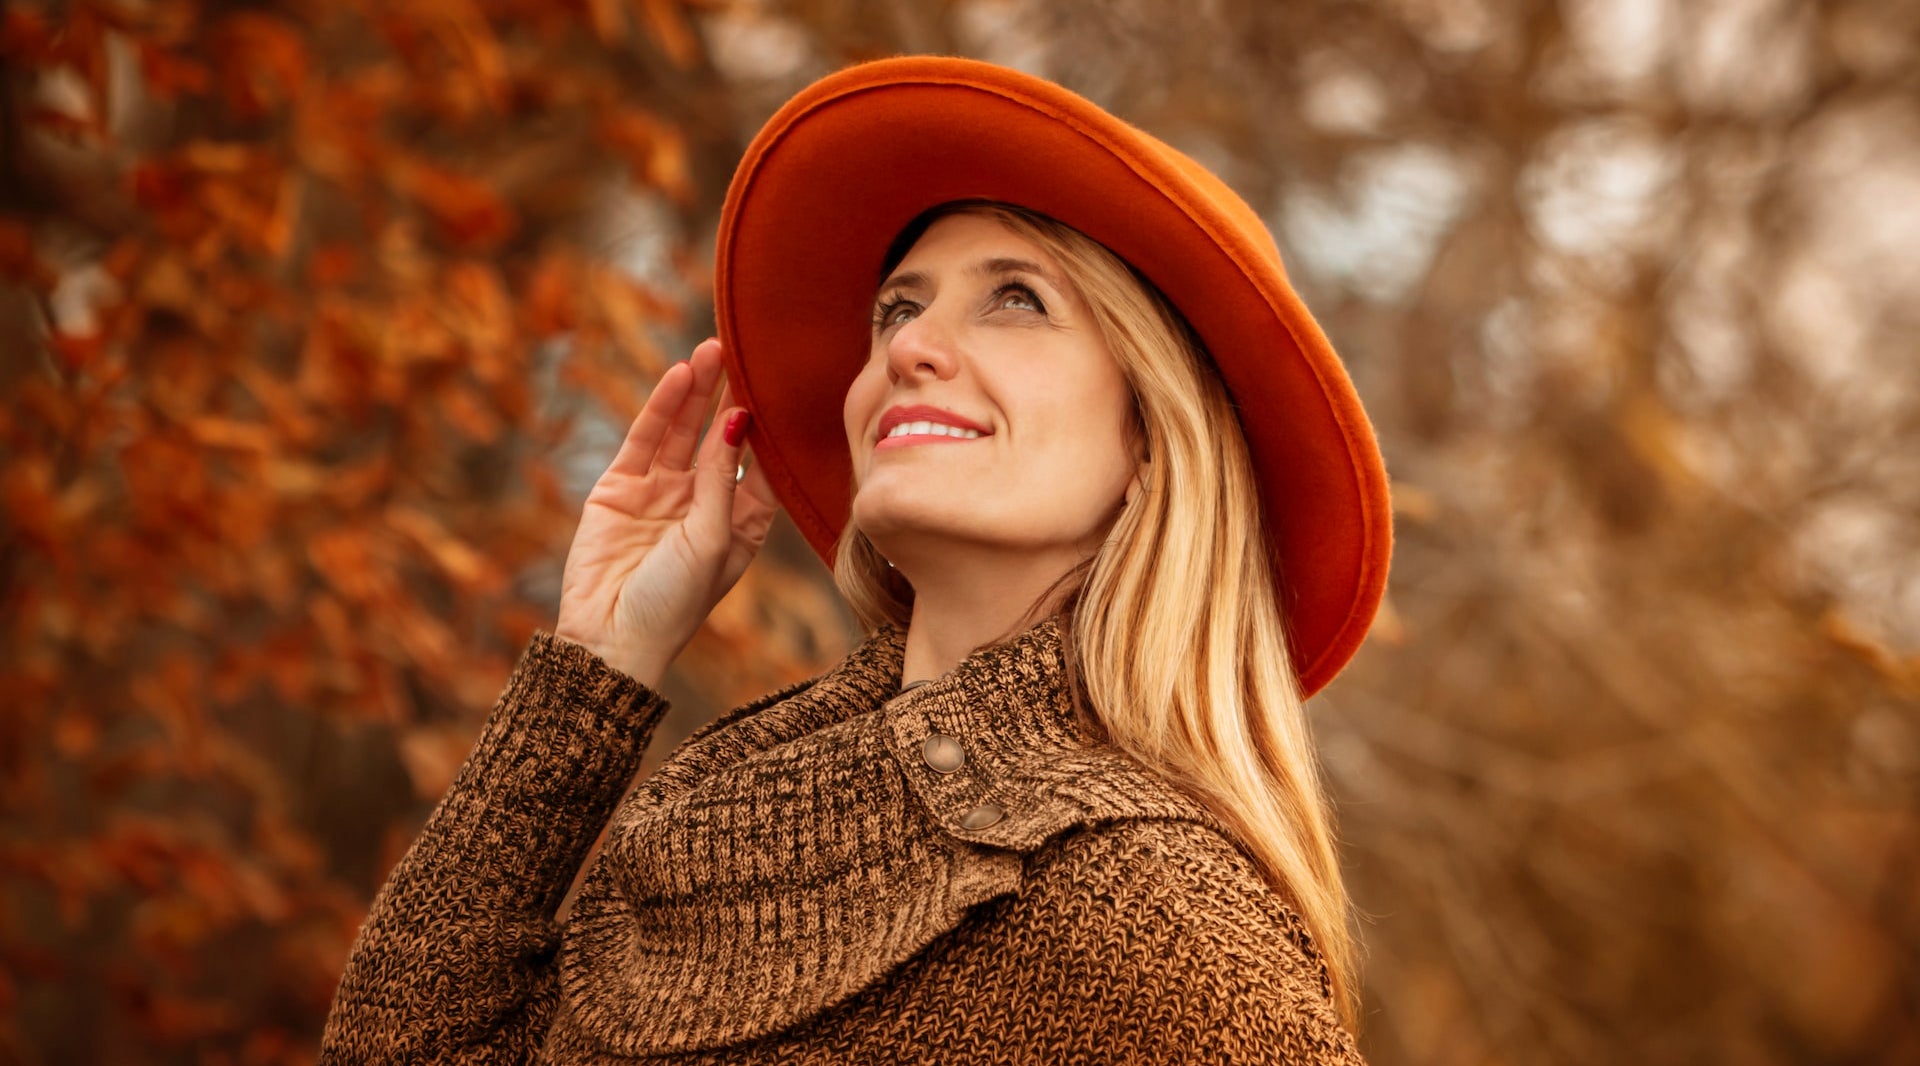 woman wearing orange hat and brown sweater in autumn